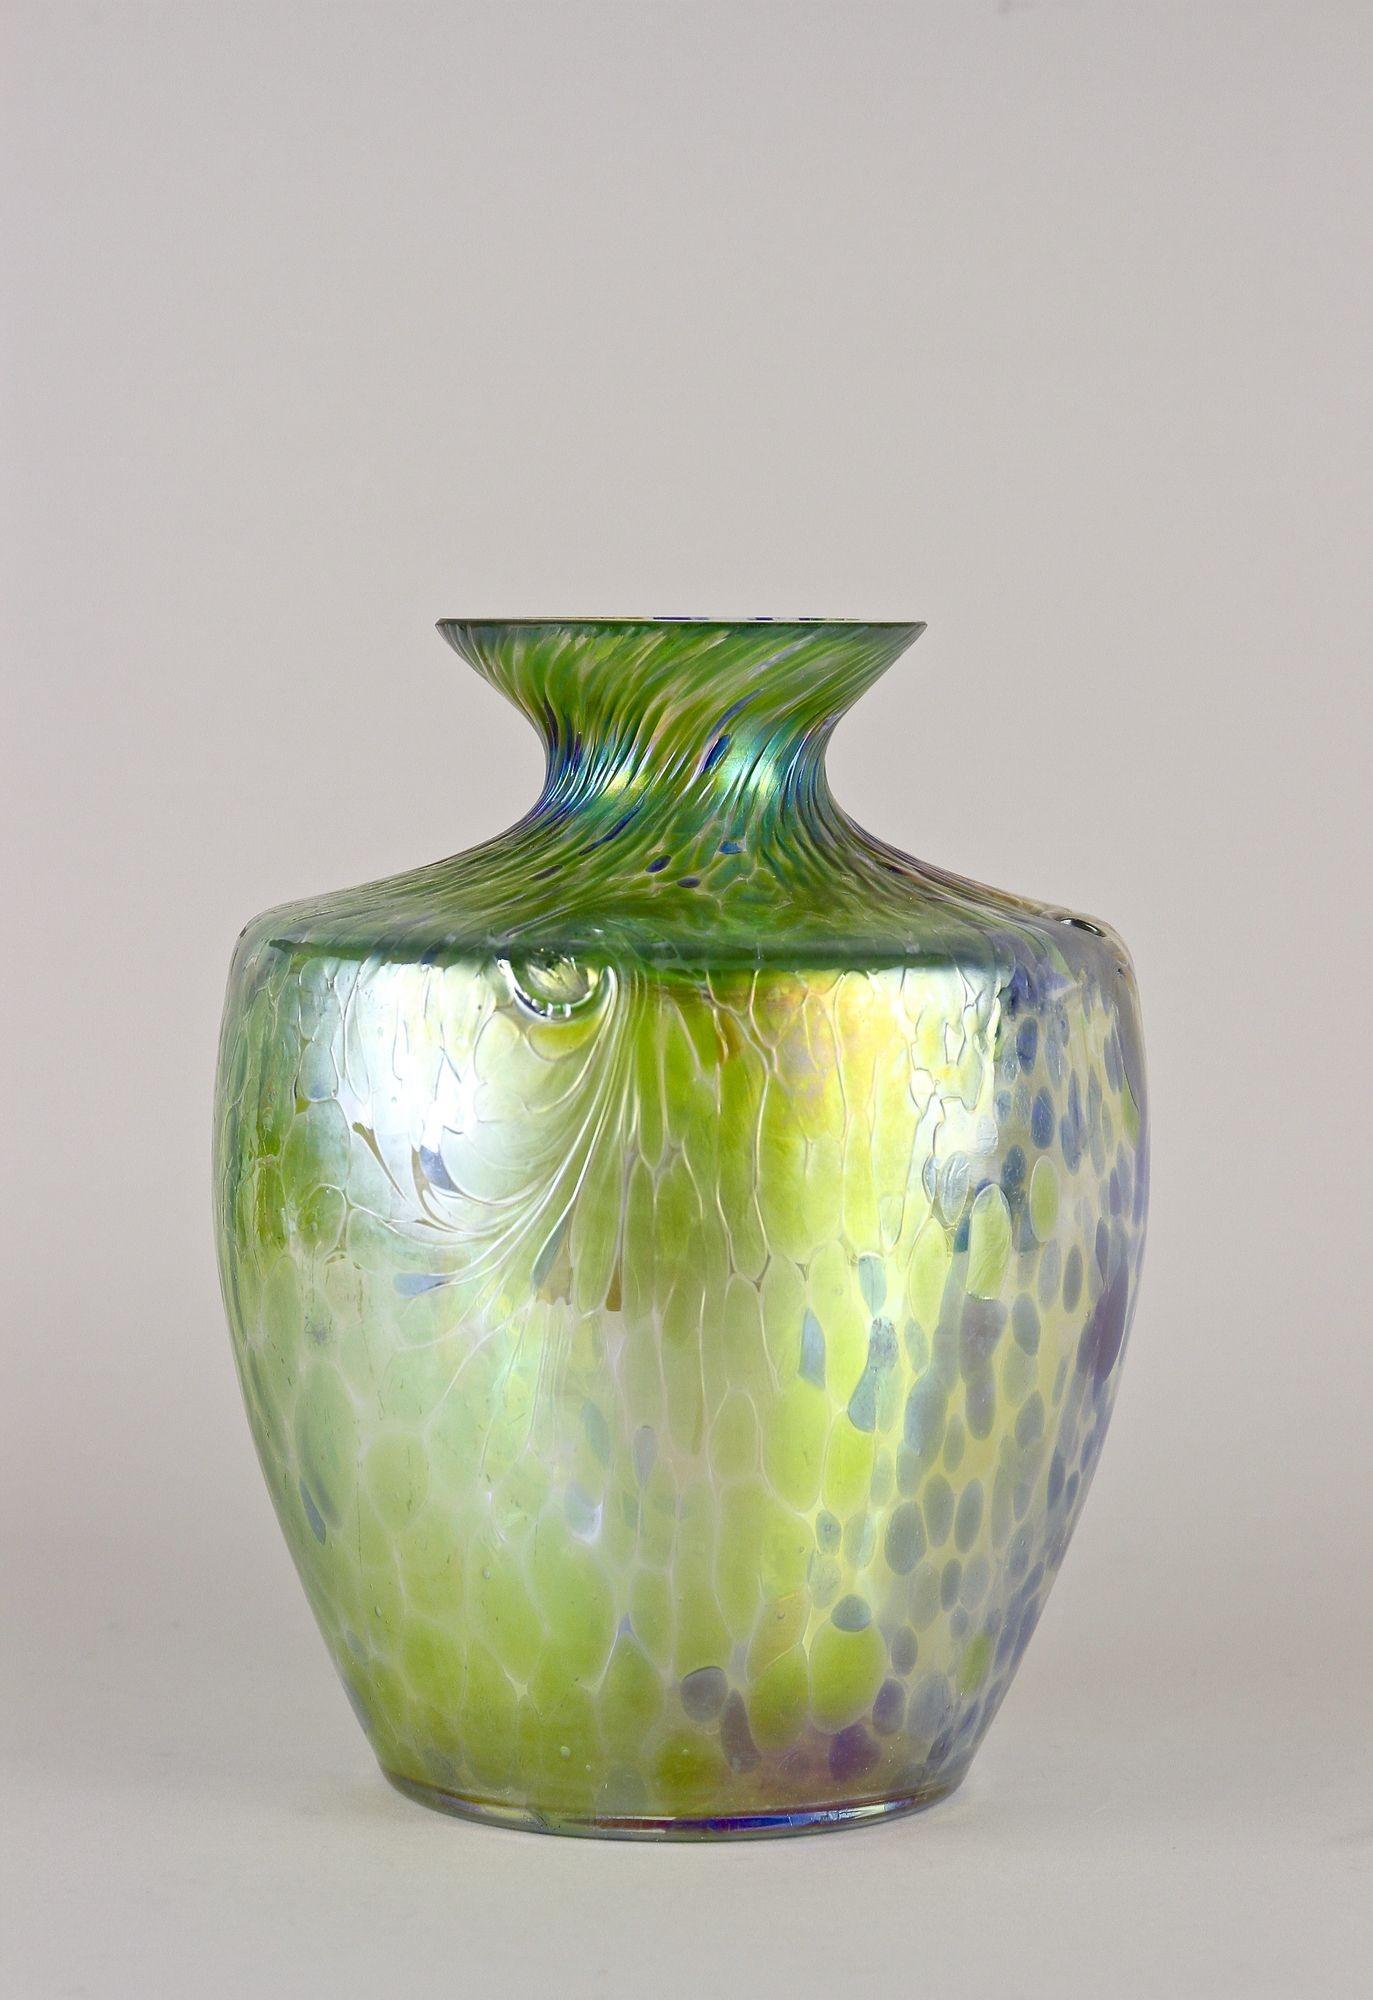 Blown Glass Iridescent Art Nouveau Glass Vase Attributed To Fritz Heckert, Bohemia ca. 1905 For Sale